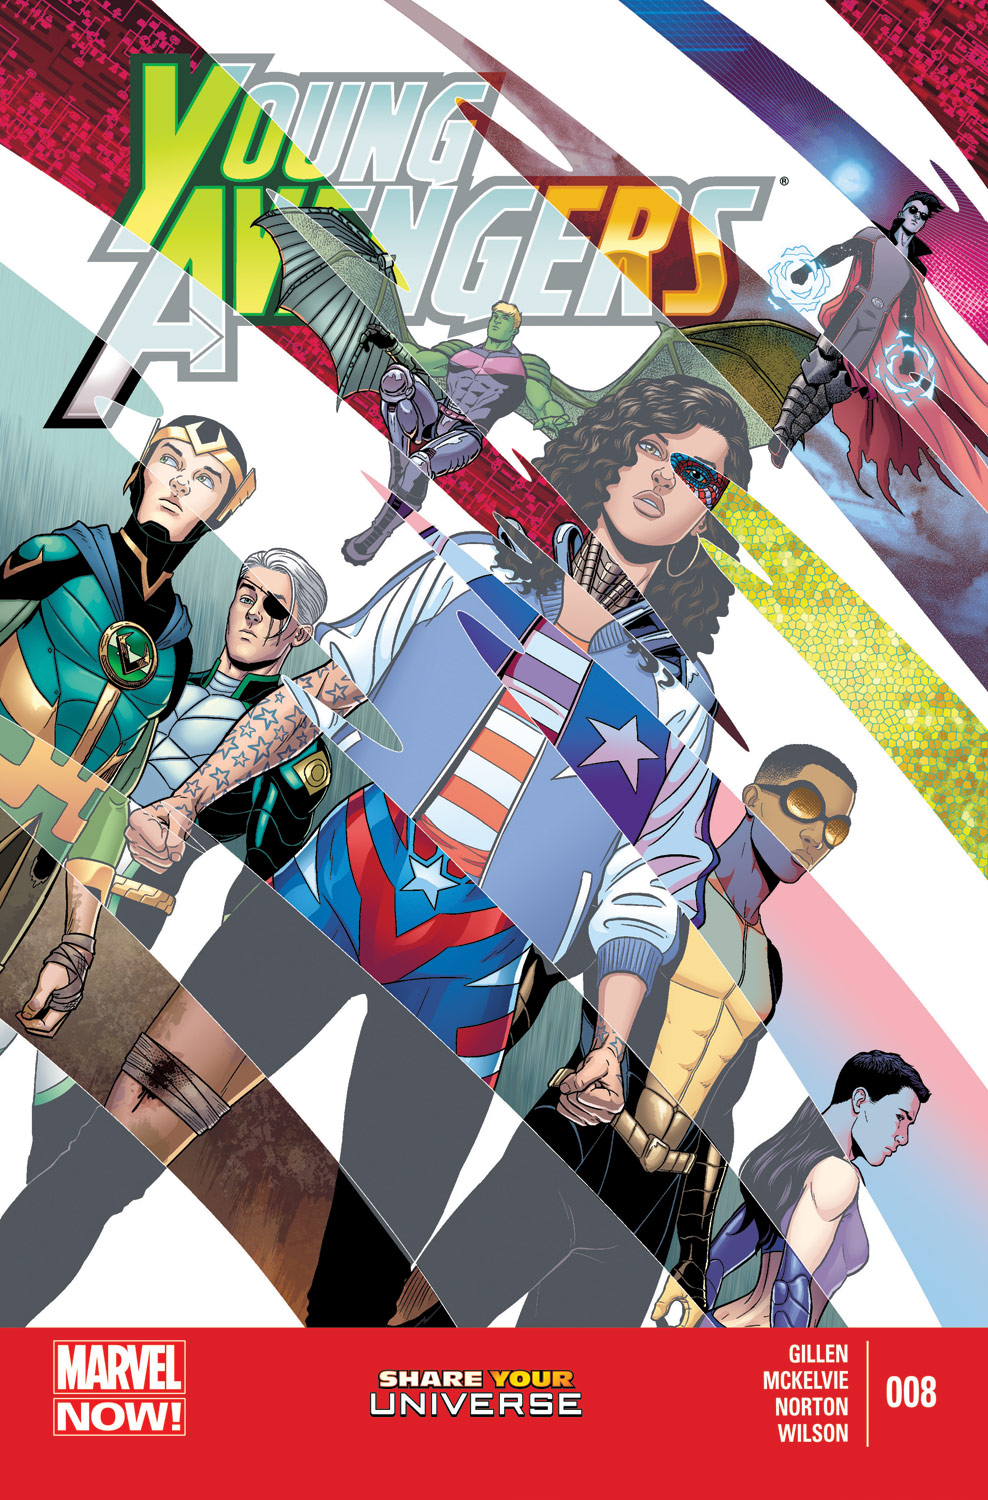 Young avengers 2013